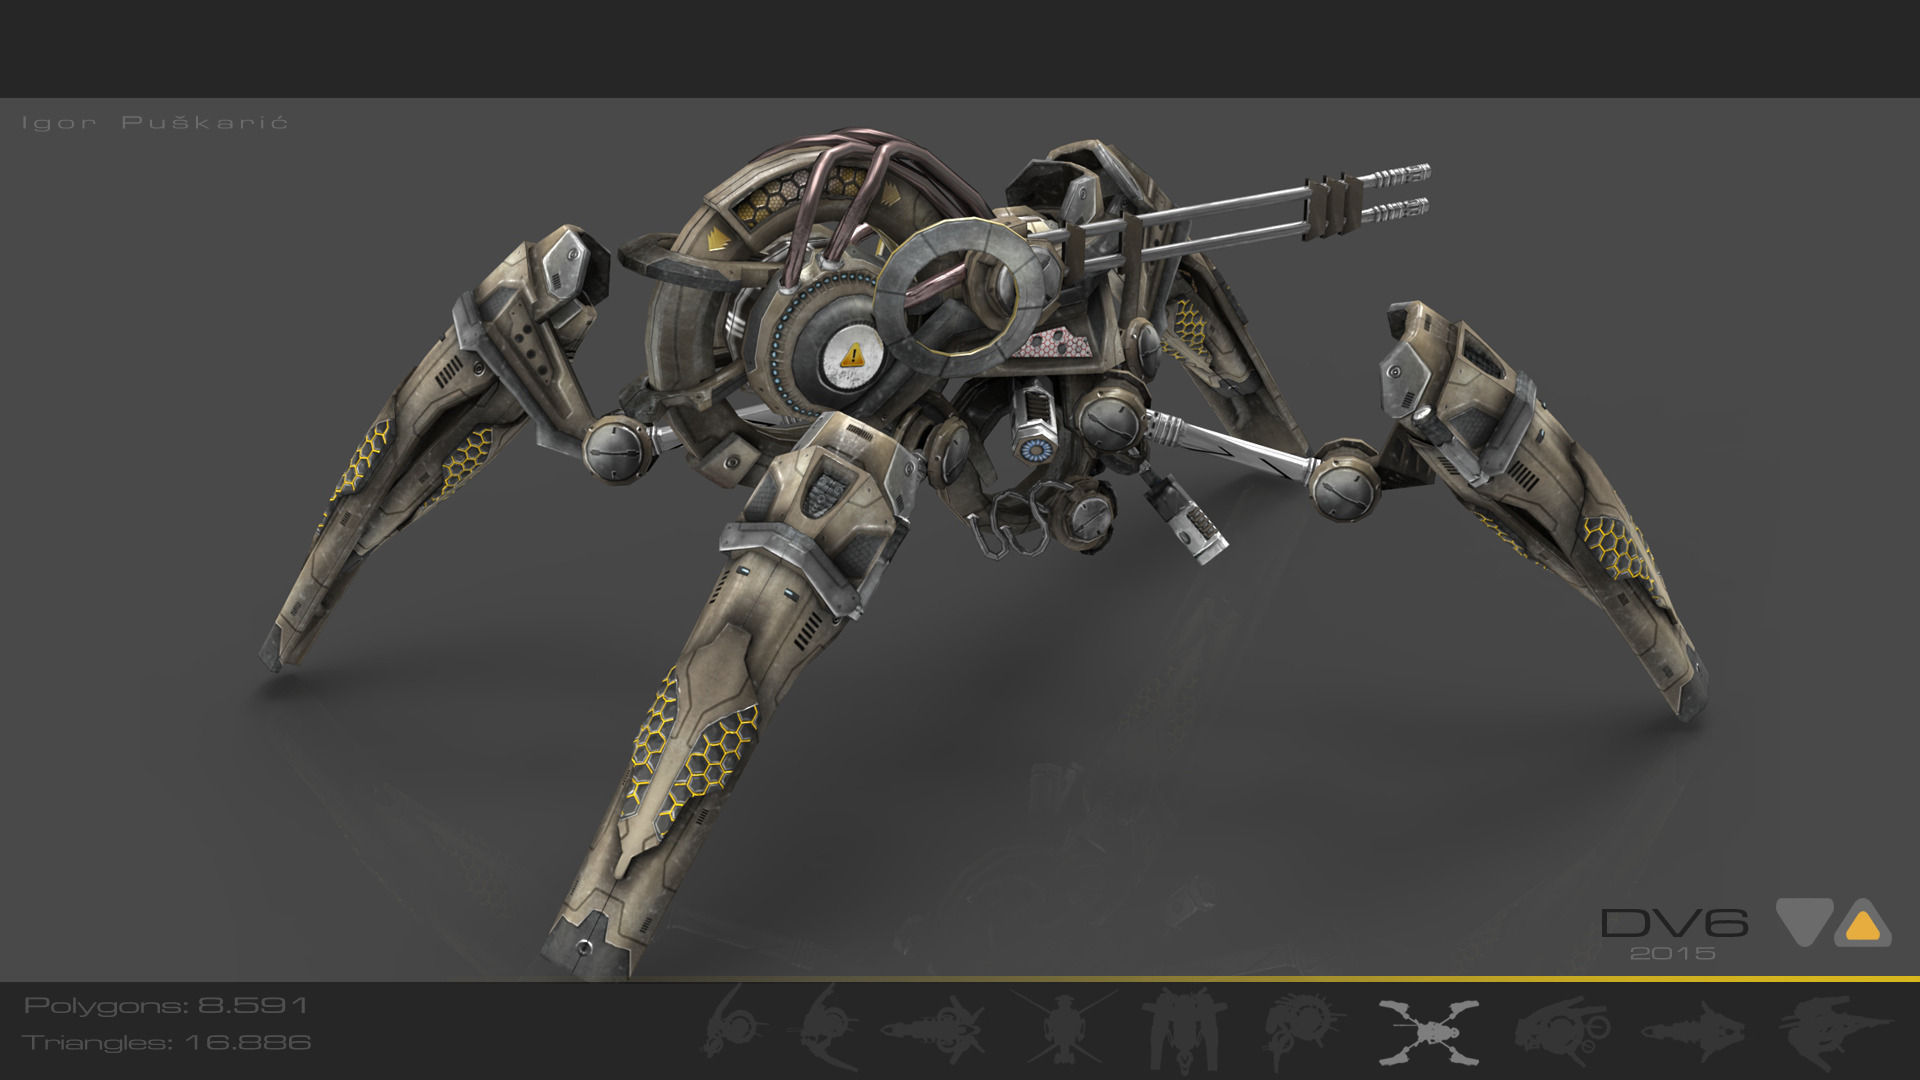 drone-v6-spider-scifi-animated-3d-model-low-poly-animated-rigged-max-obj-3ds-fbx-mtl-tga.jpg